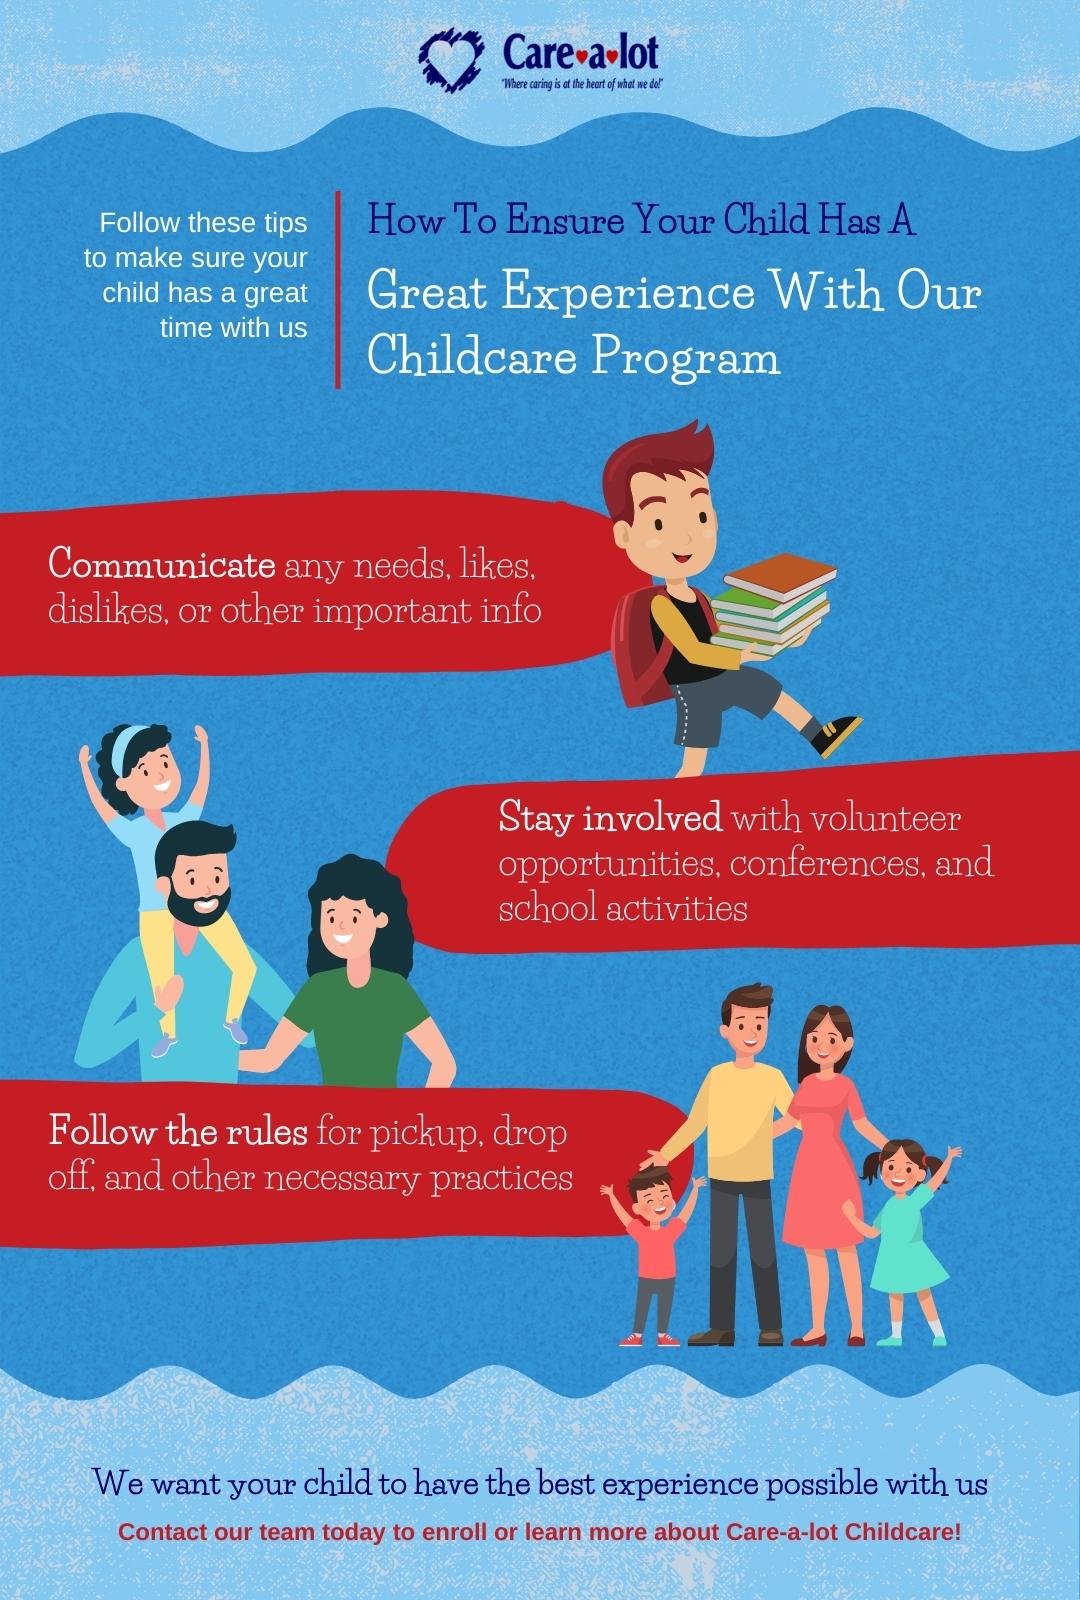 How To Ensure Your Child Has A Great Experience With Our Childcare Program Infographic